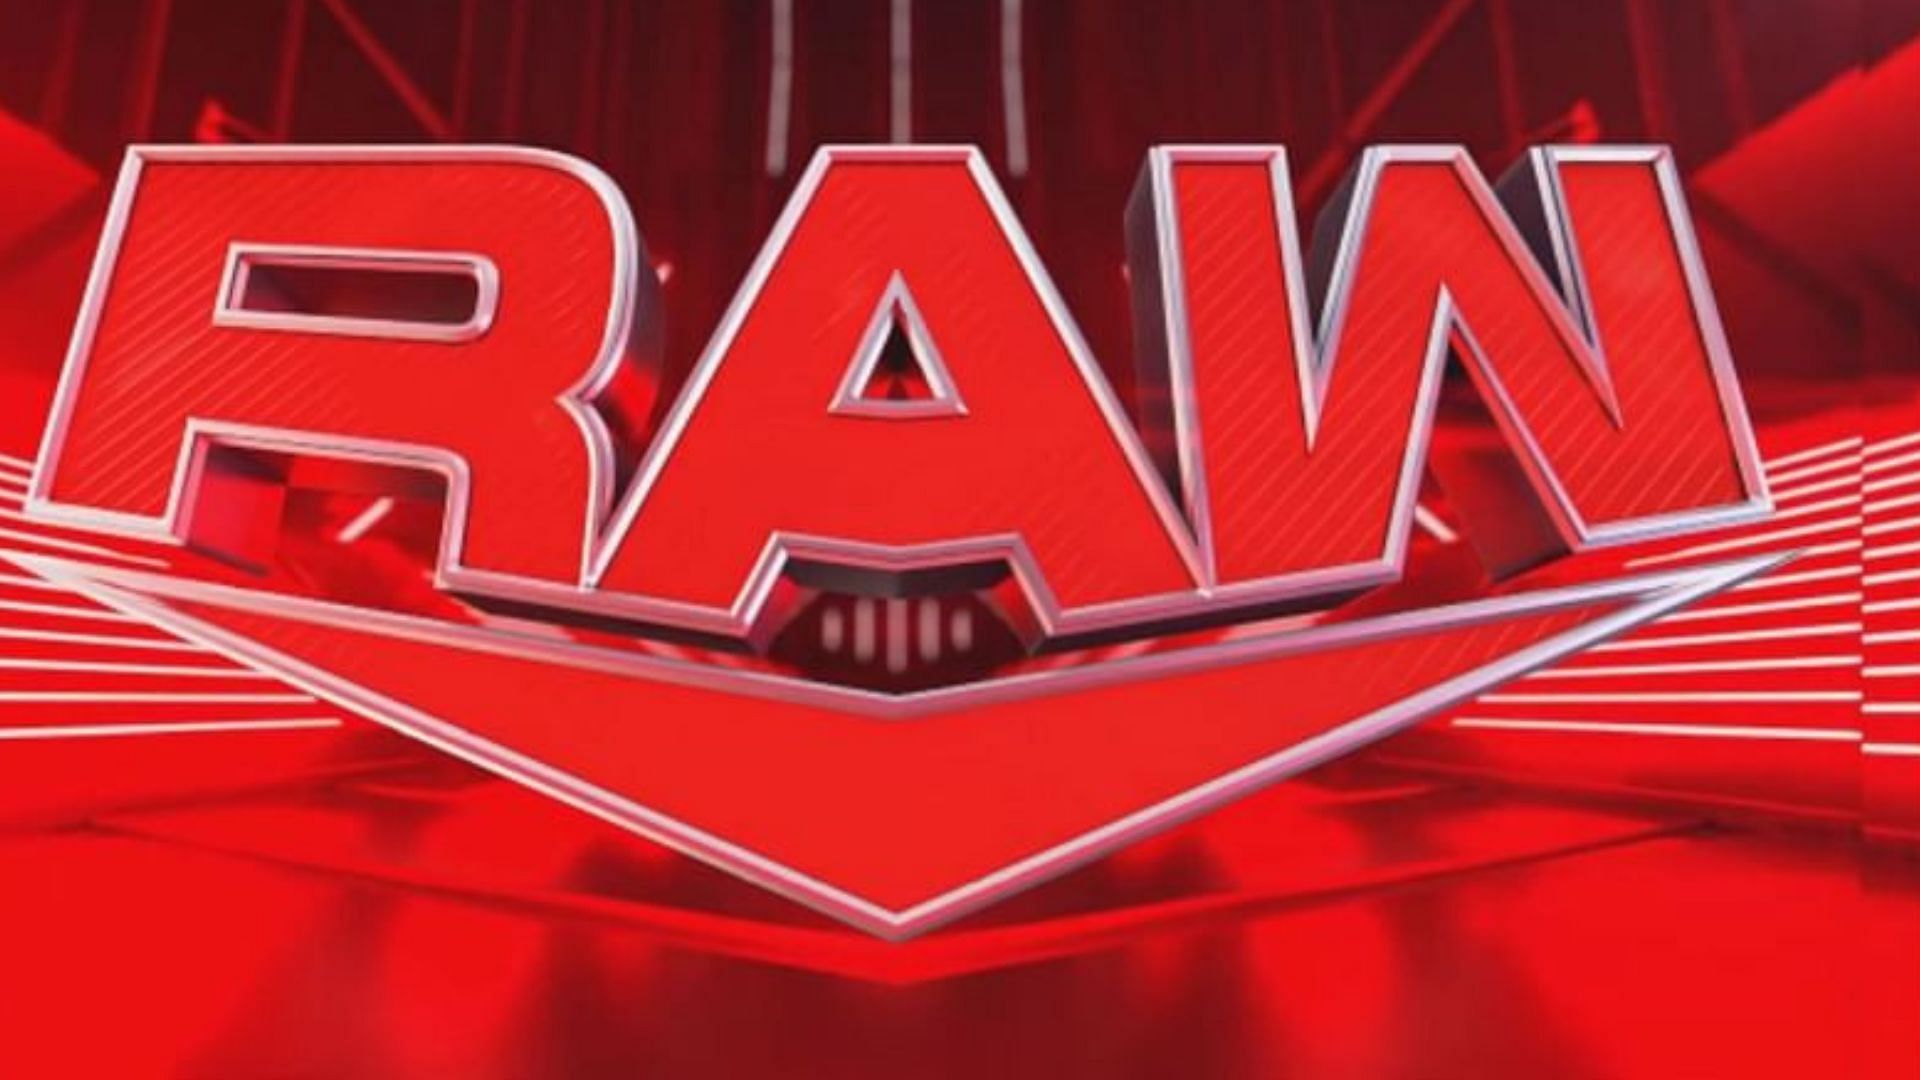 Raw Superstar could win her first title in WWE